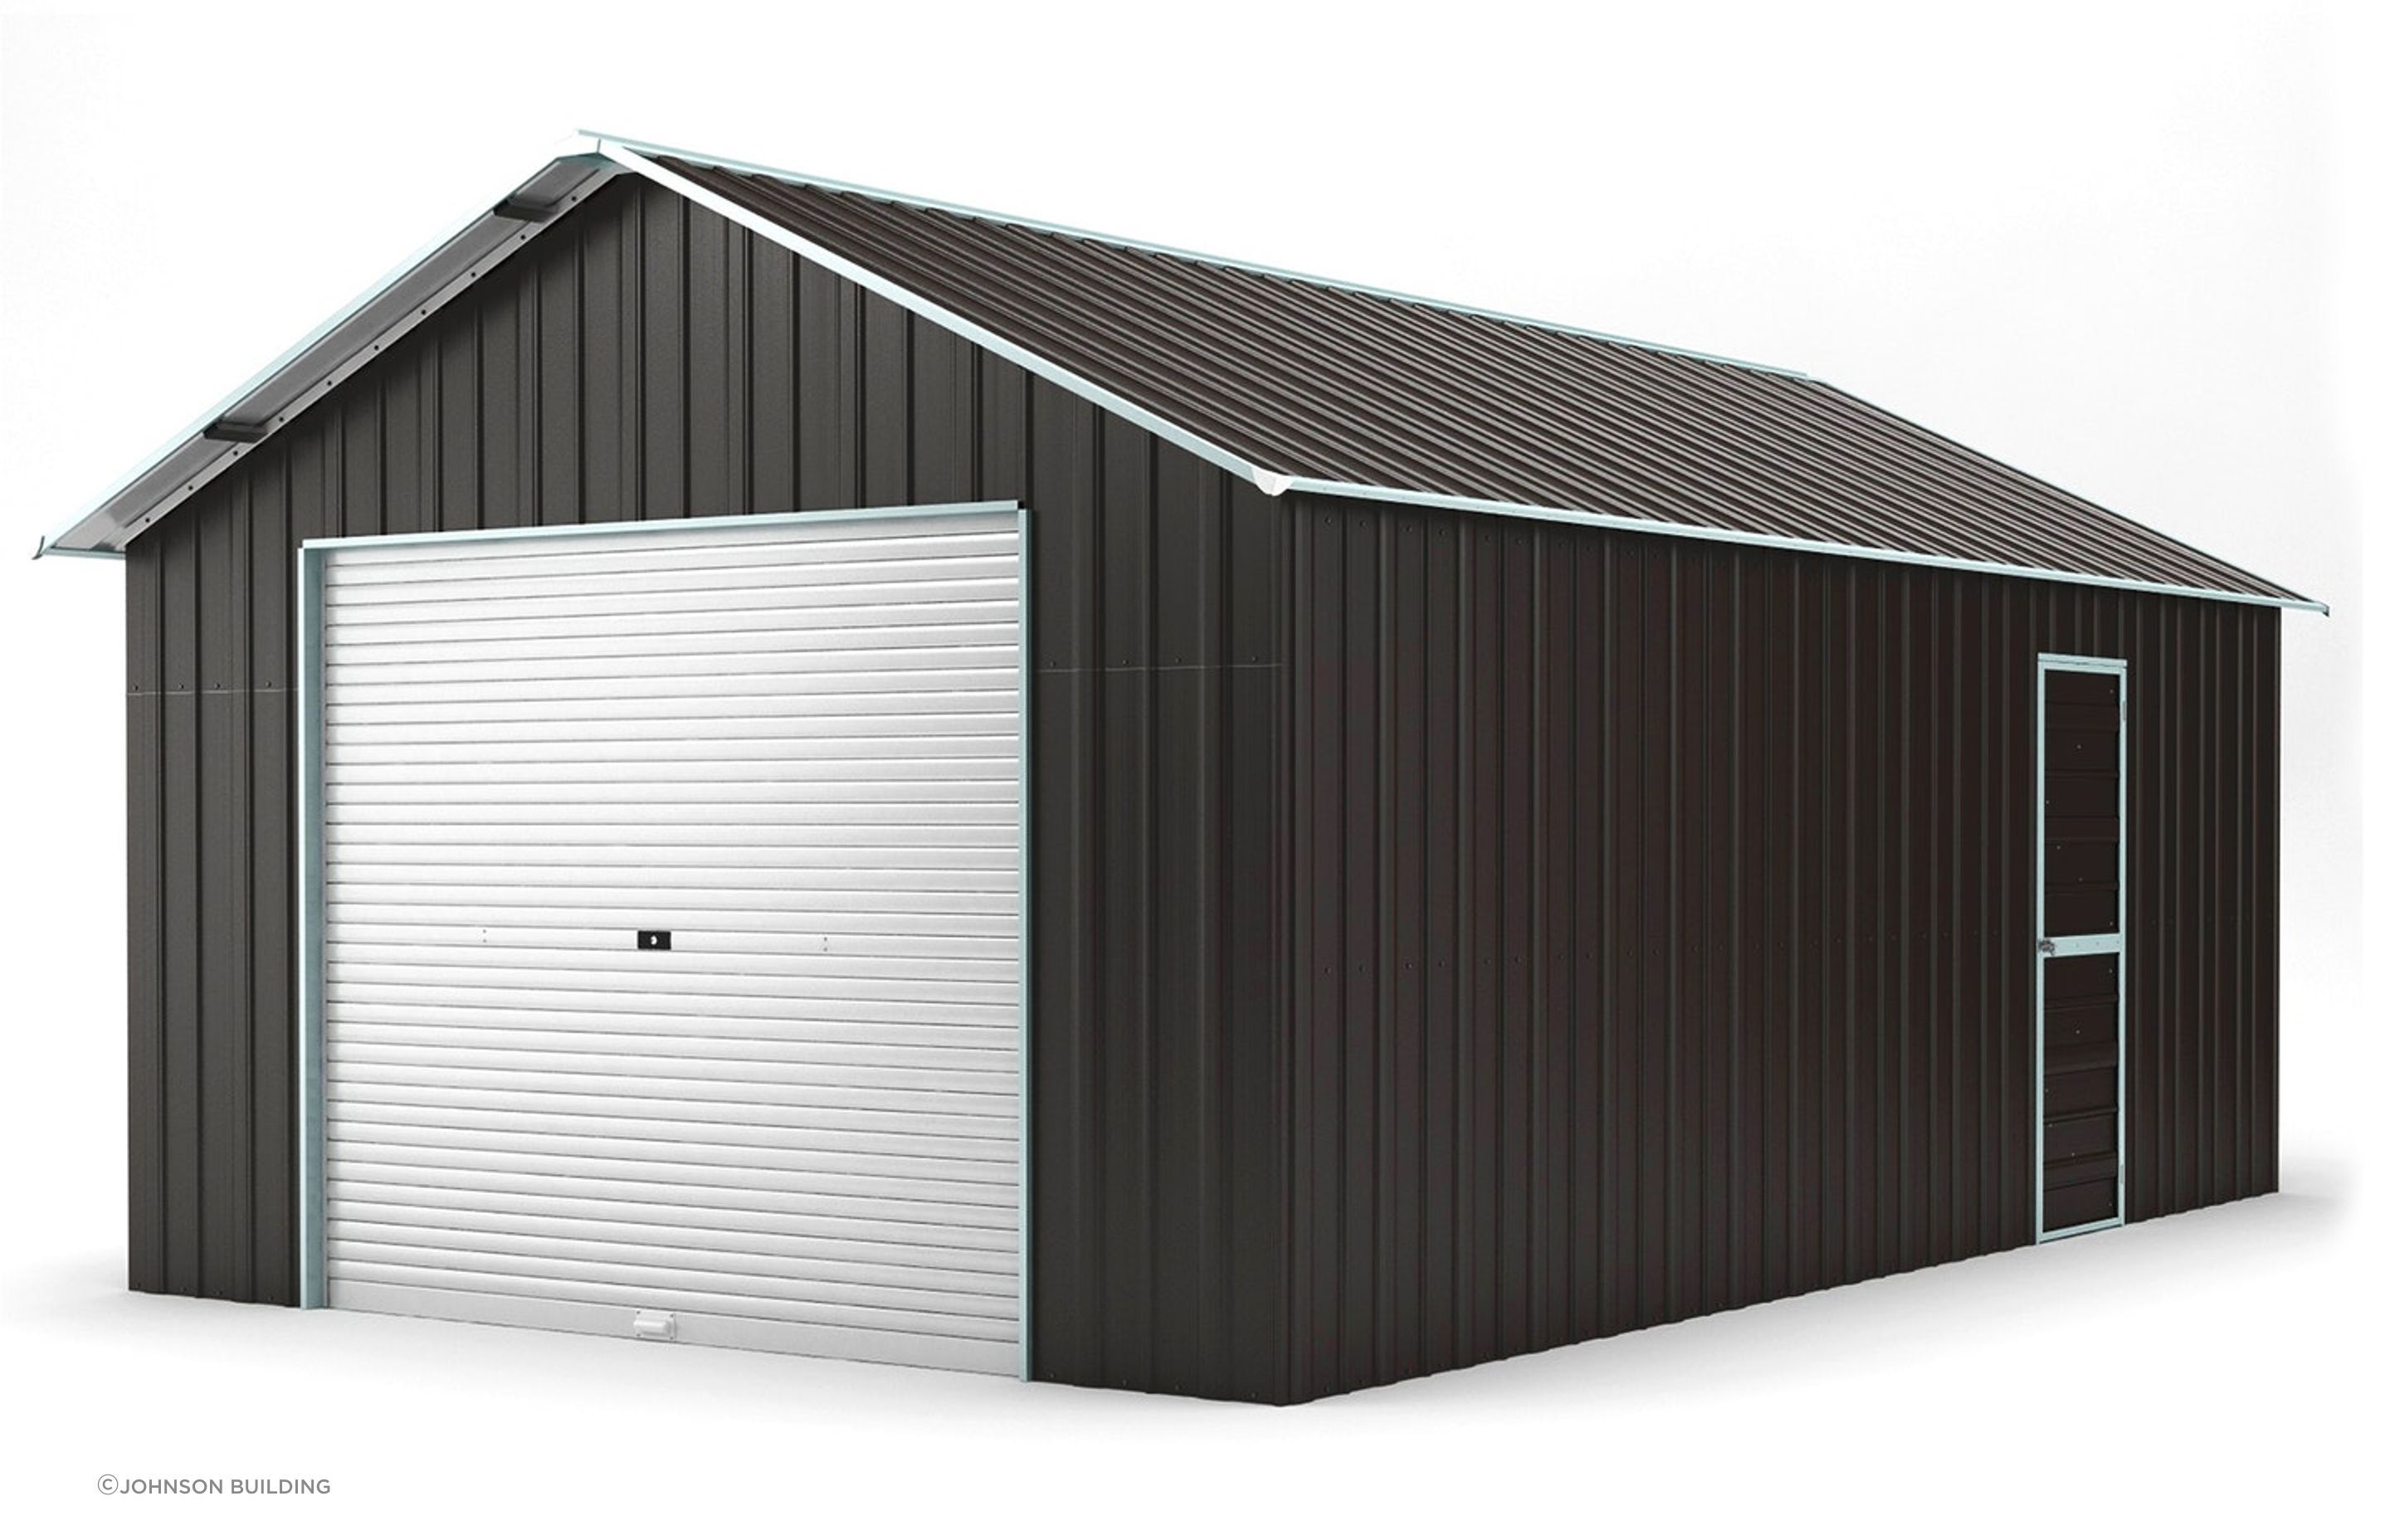 Image from Trade Tested: https://www.tradetested.co.nz/sheds-carports/garages/single-garage-4-4m-x-7-2m-widespan-ironsand.html